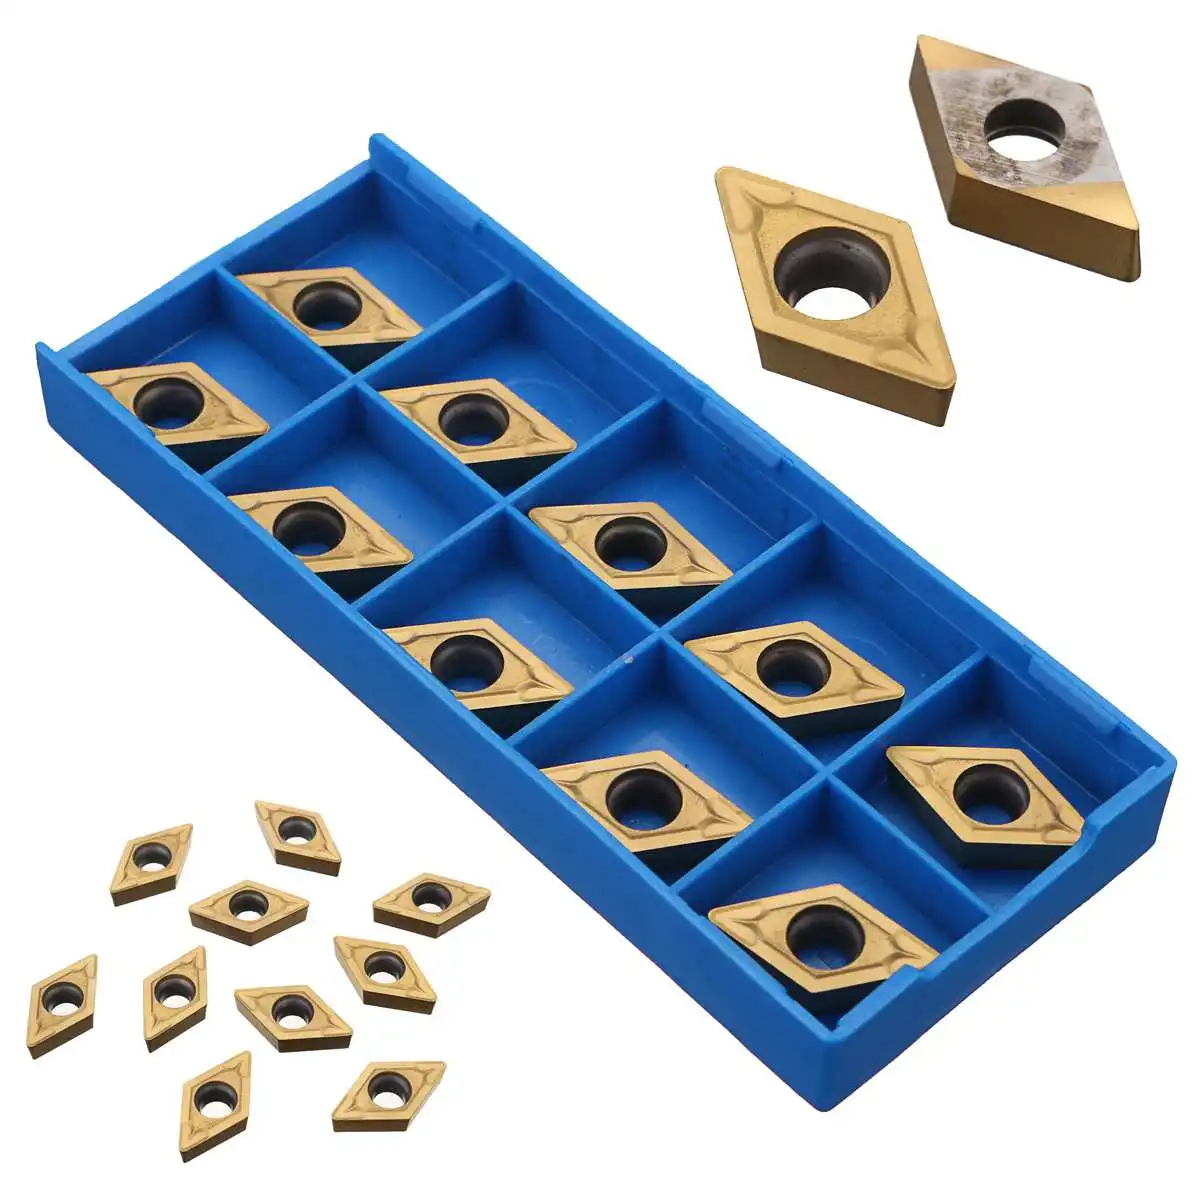 

WOLIKE 10Pc DCMT11T308 DCMT32.51 Lathe Carbide inserts Blades Set For CNC insert Outside Turning Tool Milling Cutter